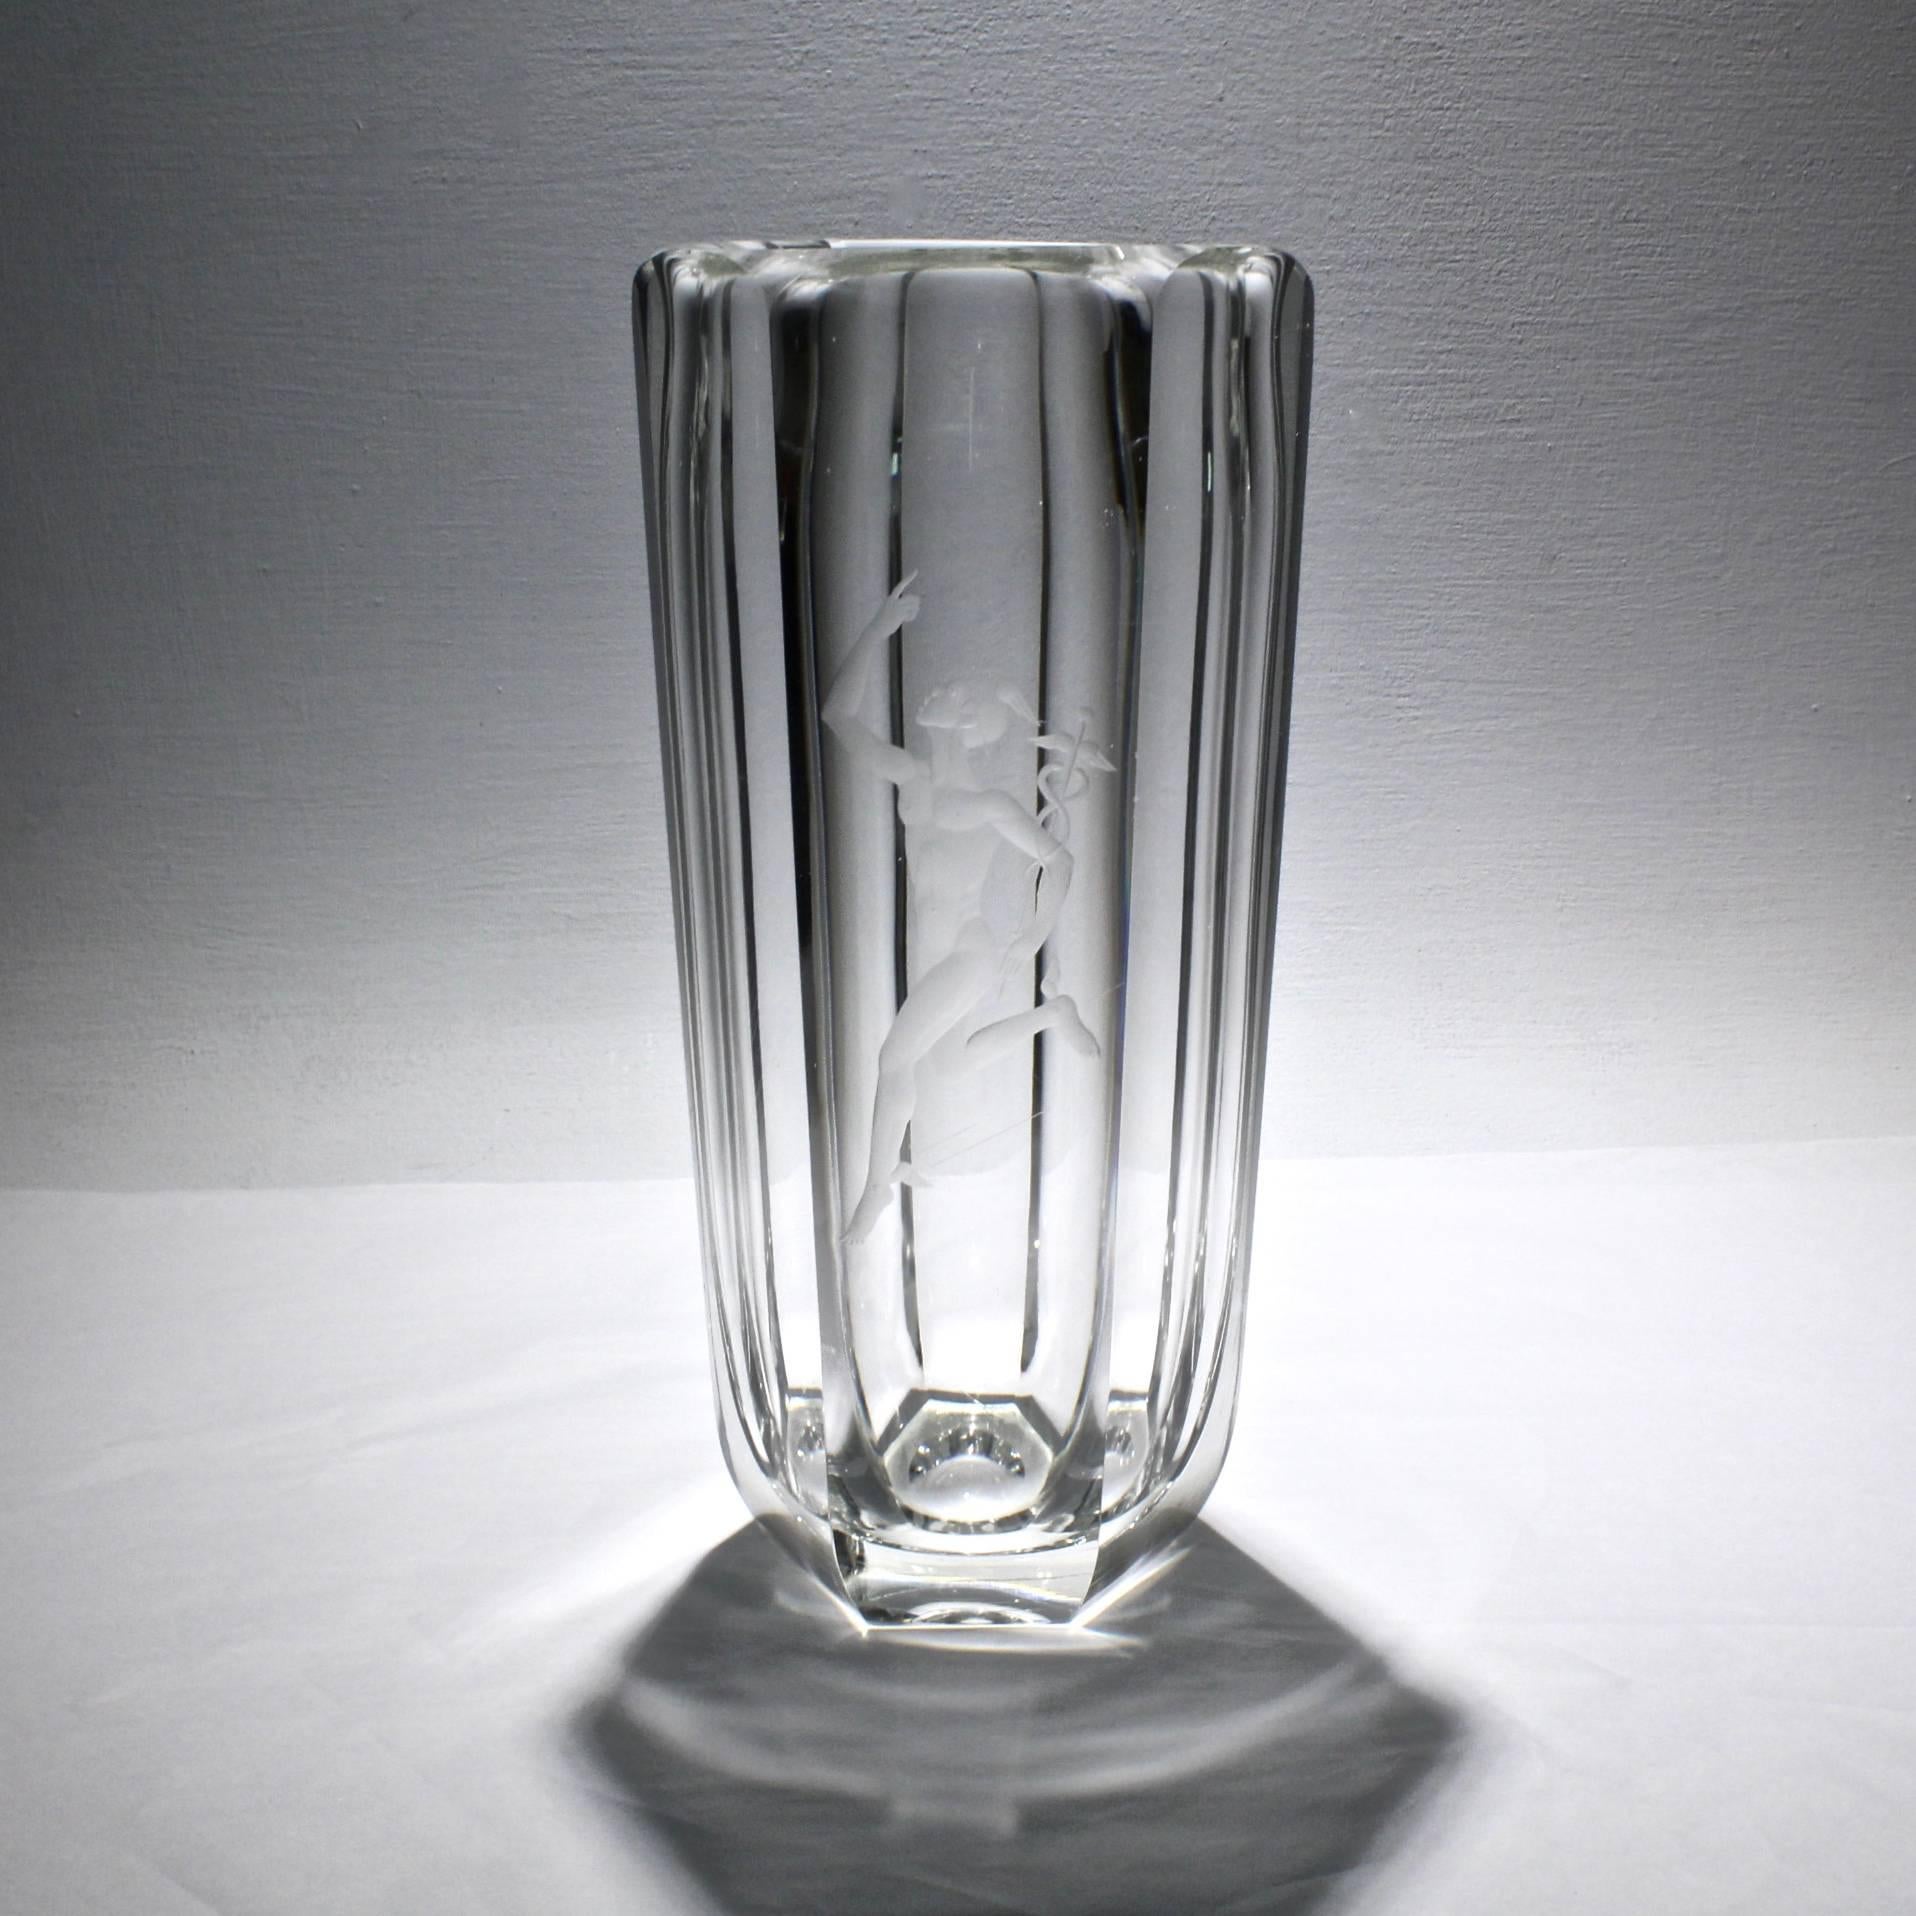 A fantastic, large, faceted Art Deco vase by Elis Bergh for Kosta Boda with an engraved image of the Greek god Mercury in full stride on the front. 

The base has an etched mark for Kosta Boda and Elis Bergh. 

Measures: Height circa 13 1/4 in.